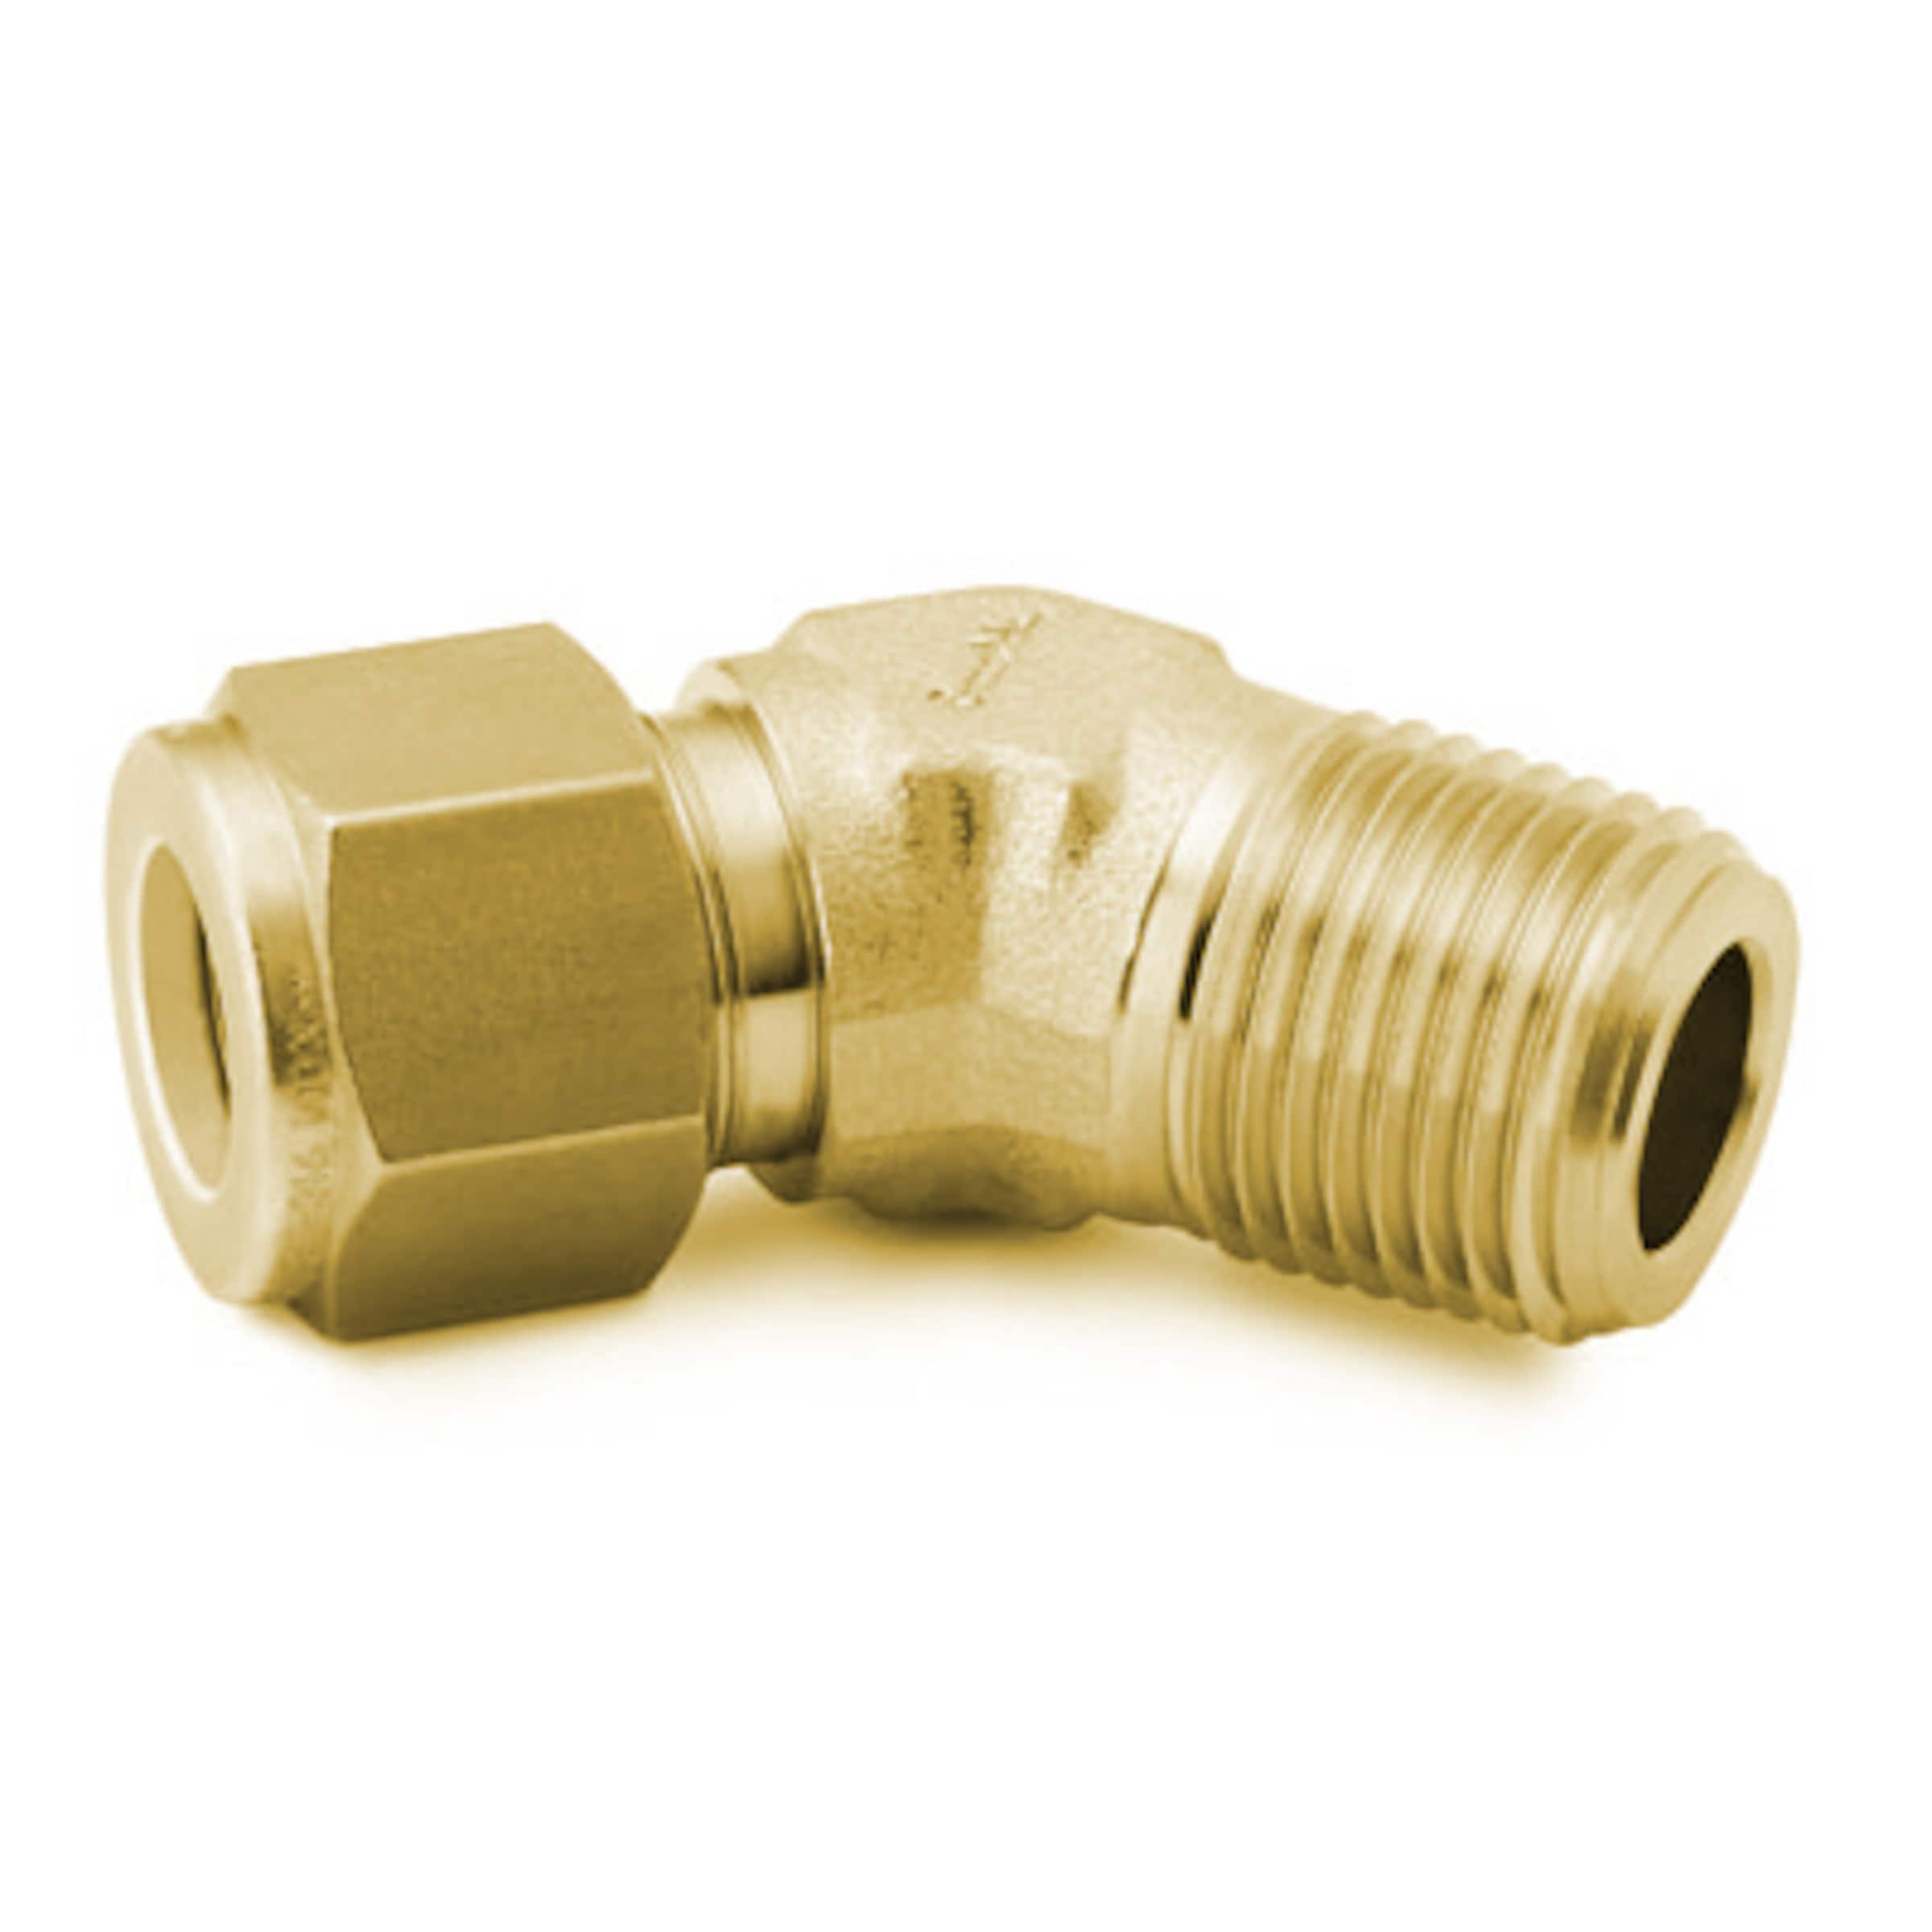 For 5/8 in Tube OD, 1/2 in Pipe Size, Brass Flare Fittings